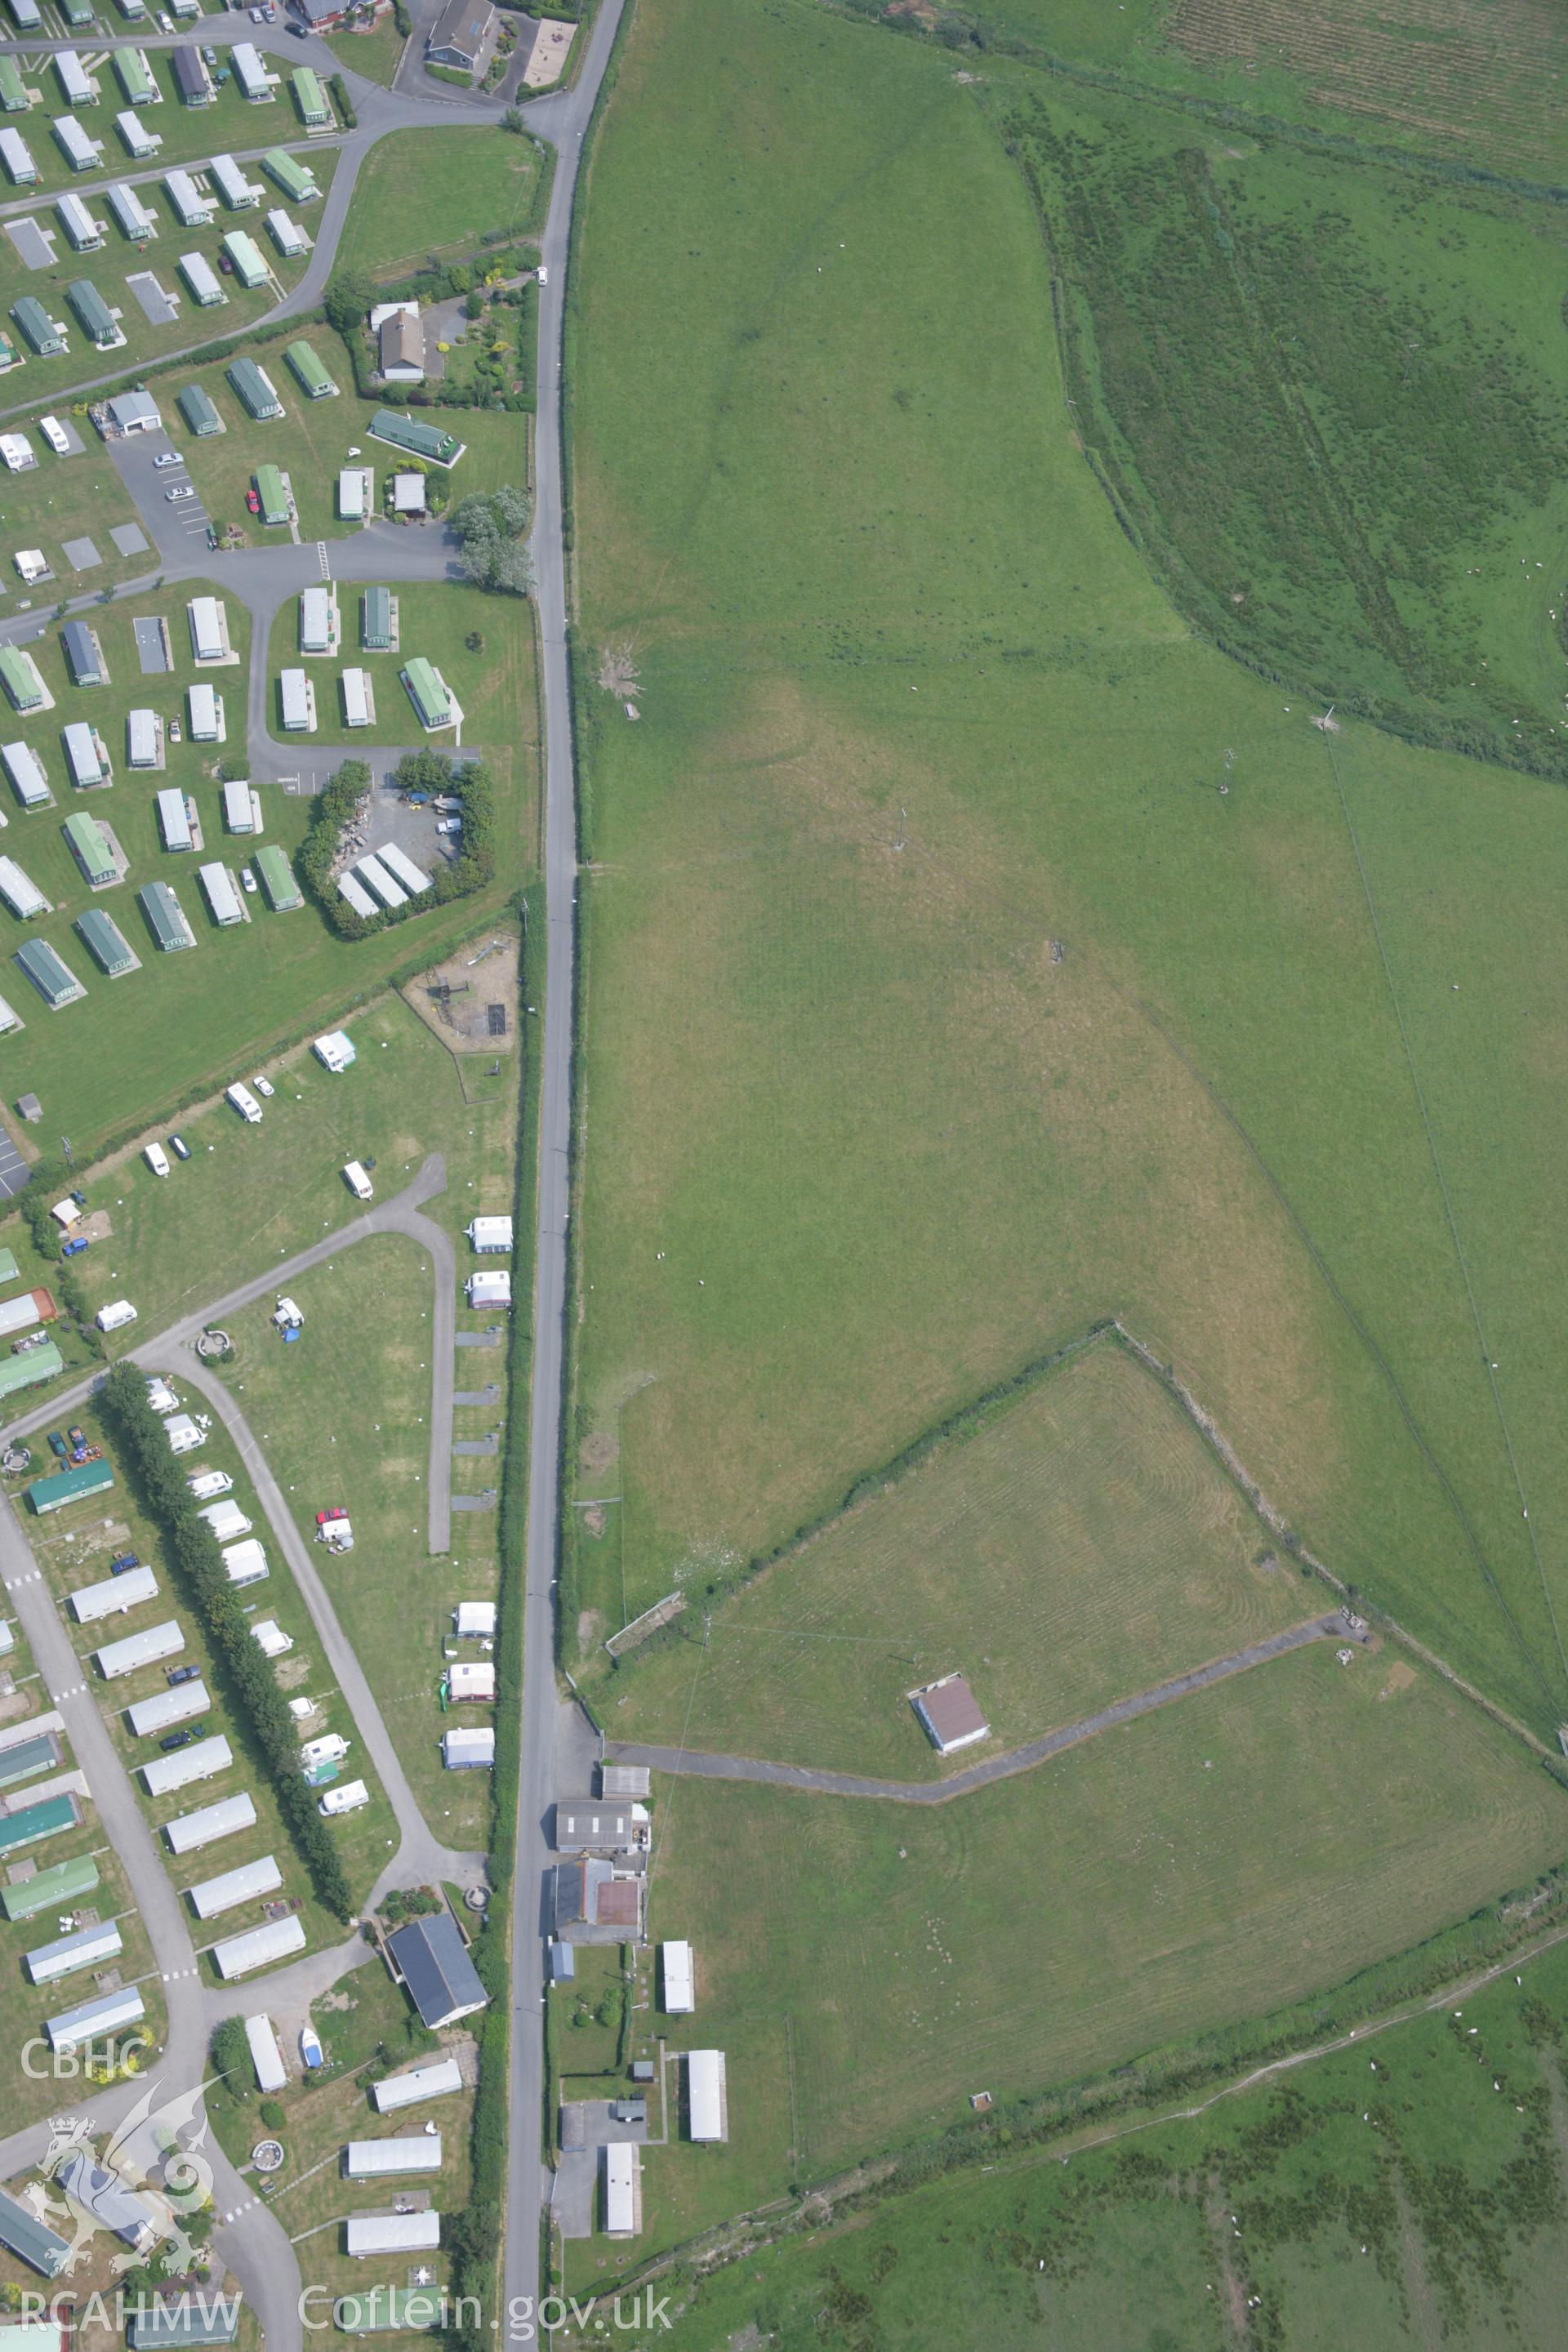 RCAHMW colour oblique aerial photograph of Glan-y-Mor Enclosure. Taken on 04 July 2006 by Toby Driver.